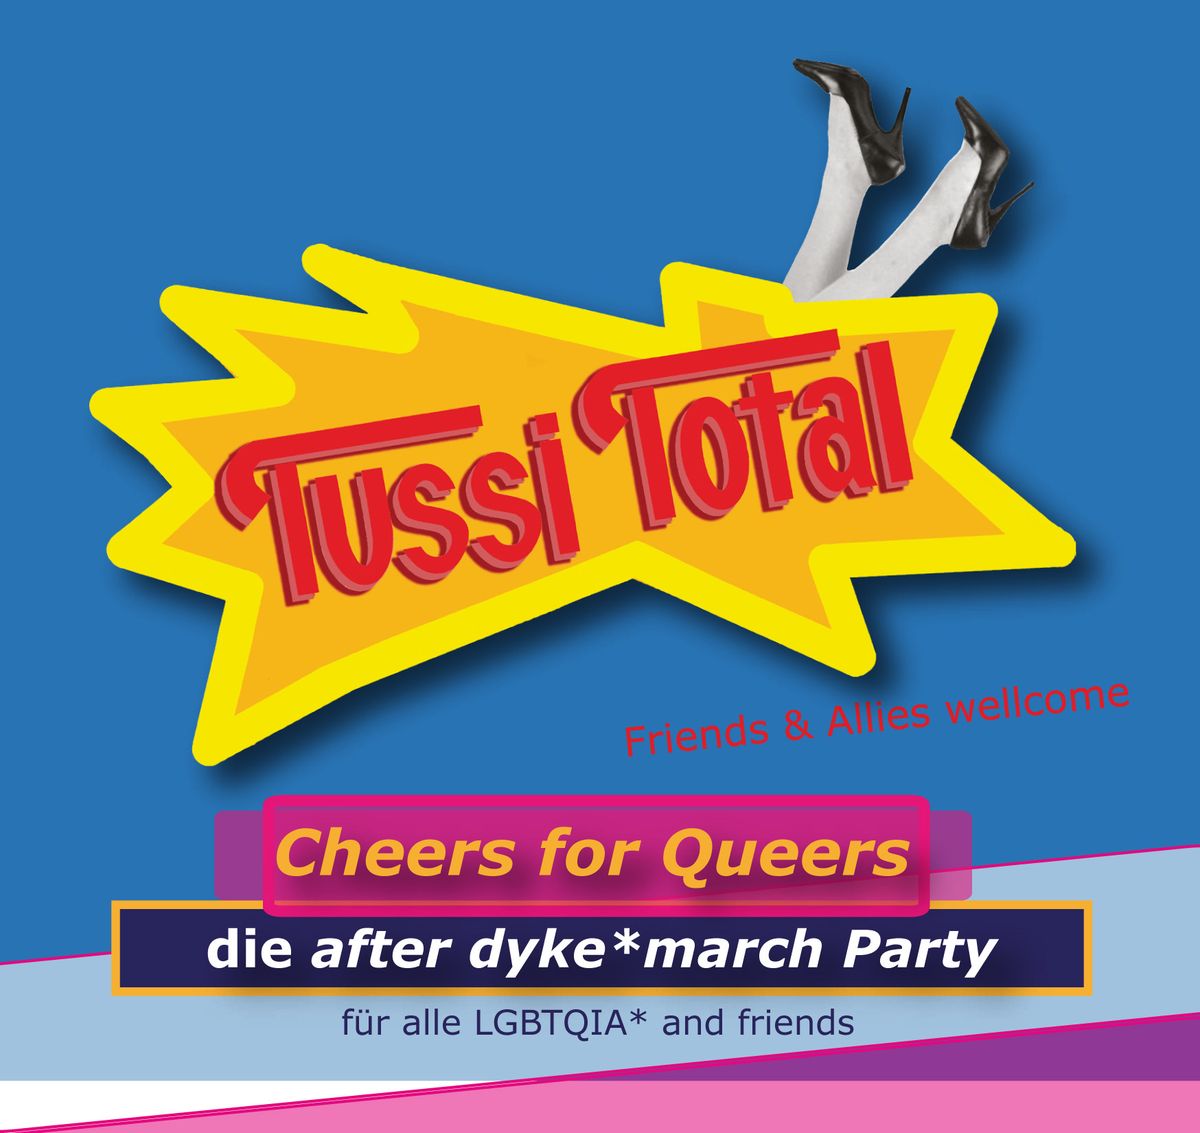 Tussi Total \u201e Cheers for Queers \u201d die after dyke*march Party!